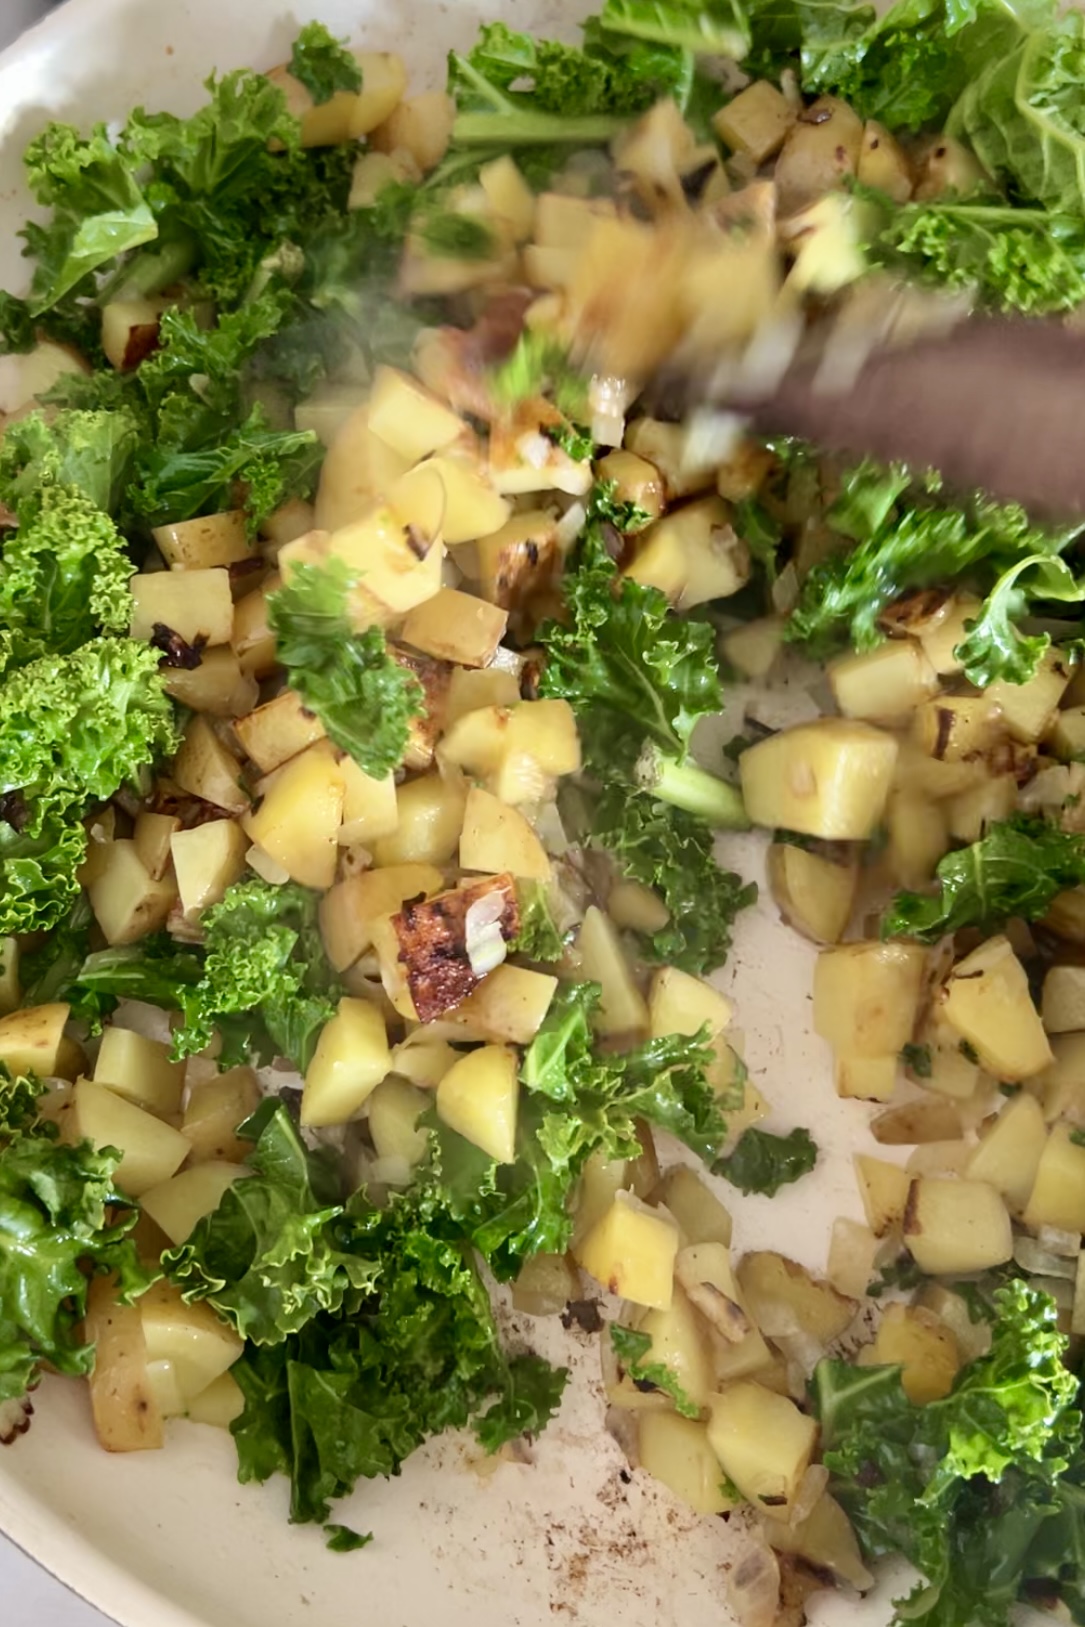 A close-up image shows a pan filled with diced potatoes and fresh kale being stirred. The potatoes are lightly browned, indicating they have been sautéed or fried. The greens look fresh and vibrant, contrasting with the golden-brown cubes of potato. Steam rises from the hot pan, perfect for Kale Potato Tacos.